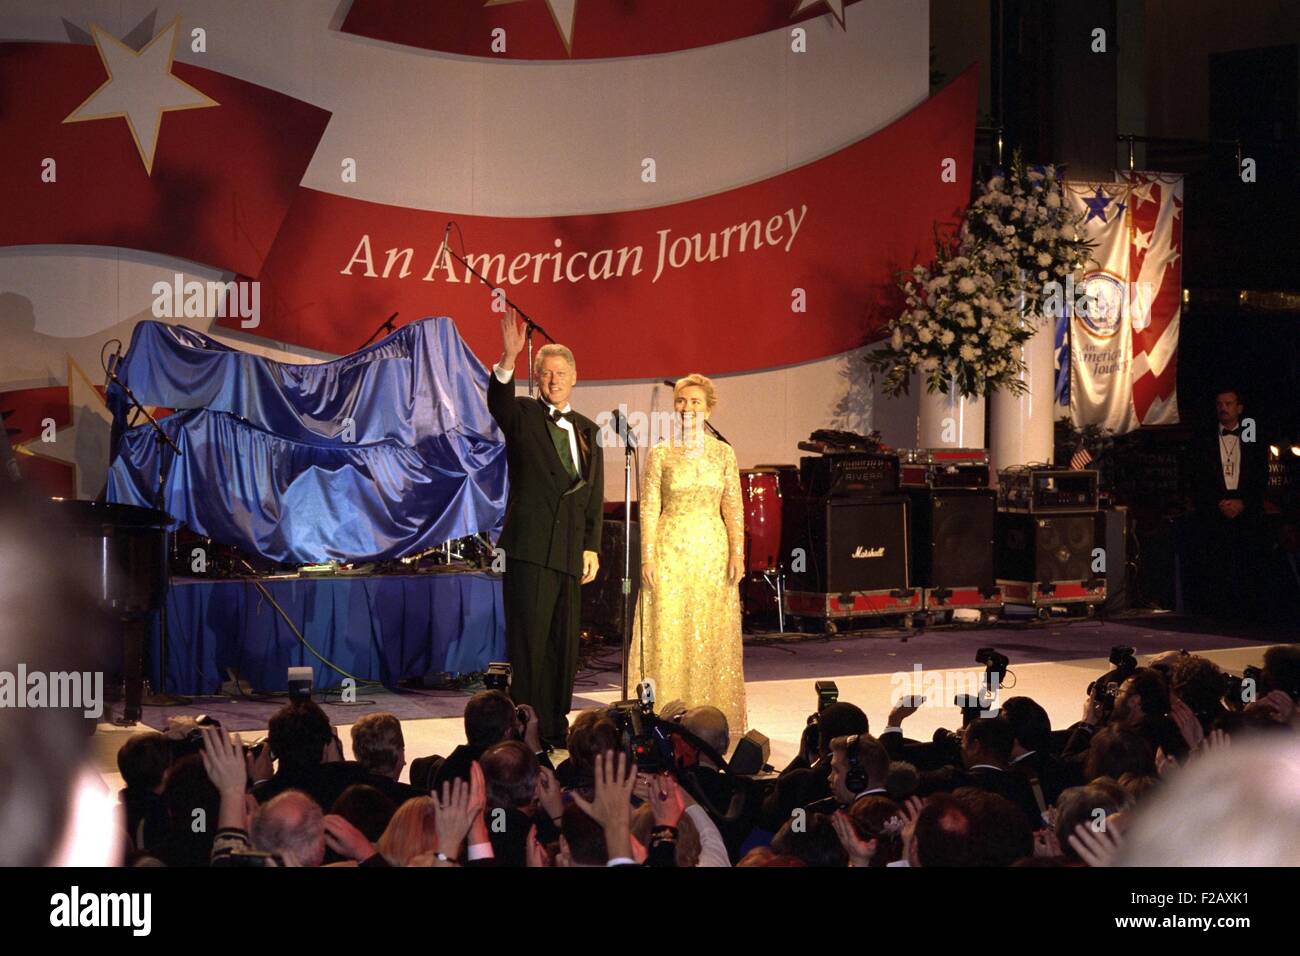 First Lady Hillary Clinton wearing an Oscar de la Renta evening gown at a 1997 Inaugural Ball. President Bill Clinton waves to the crowd beyond the press photographers. Jan. 20, 1997. (BSLOC 2015 2 198) Stock Photo